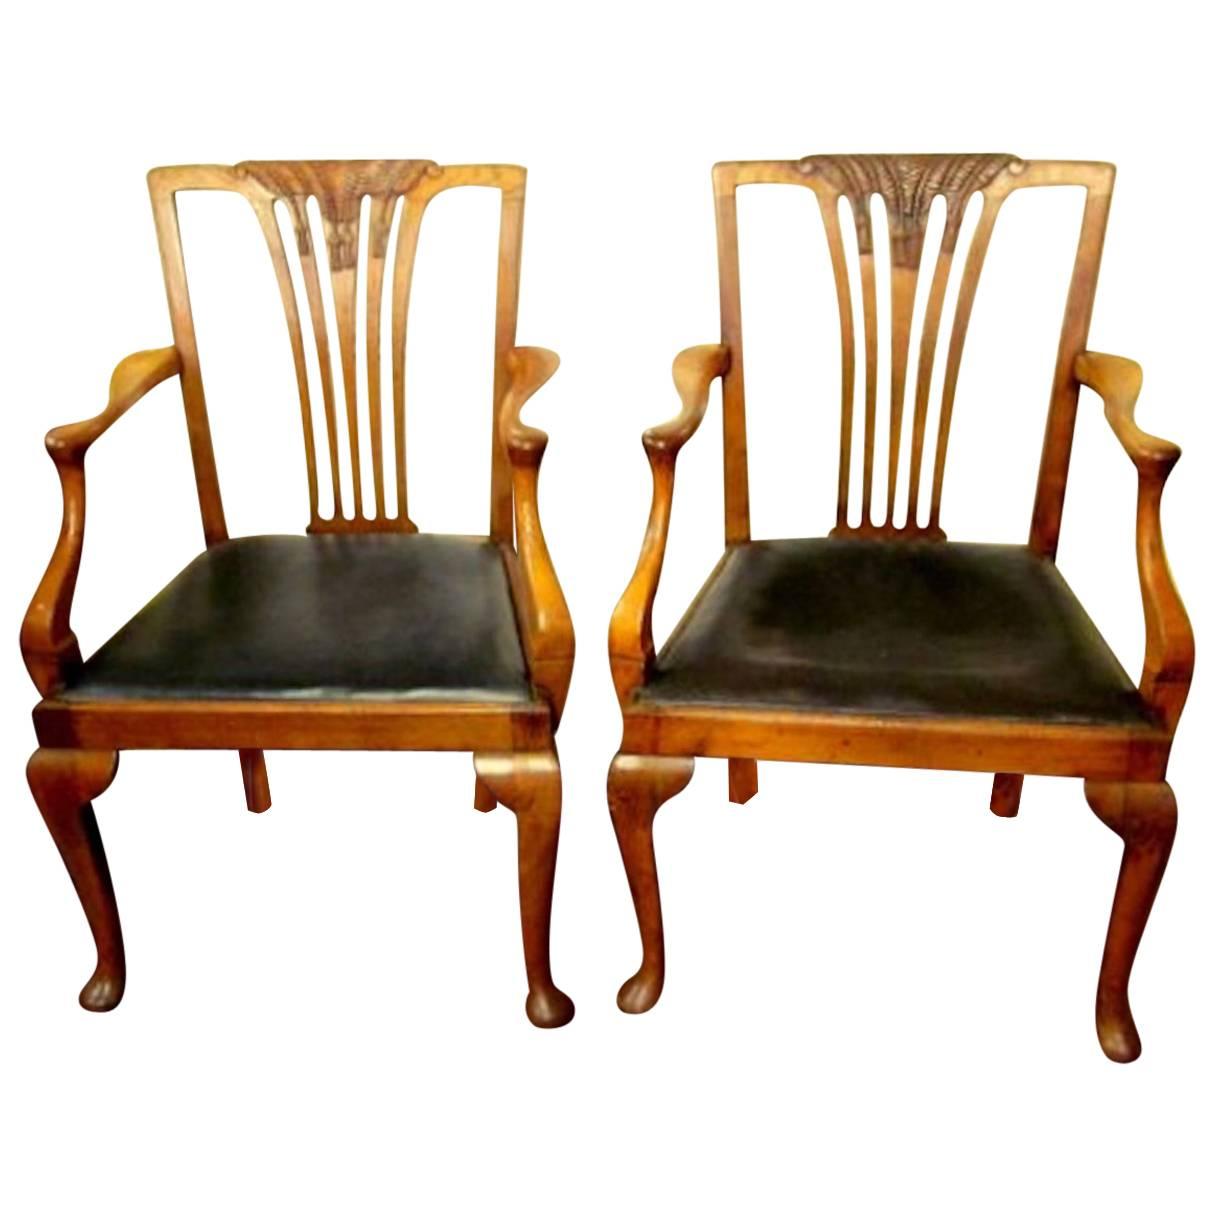 Pair of Antique English Hand-Carved Chestnut and Elm Geo. I Style Armchairs